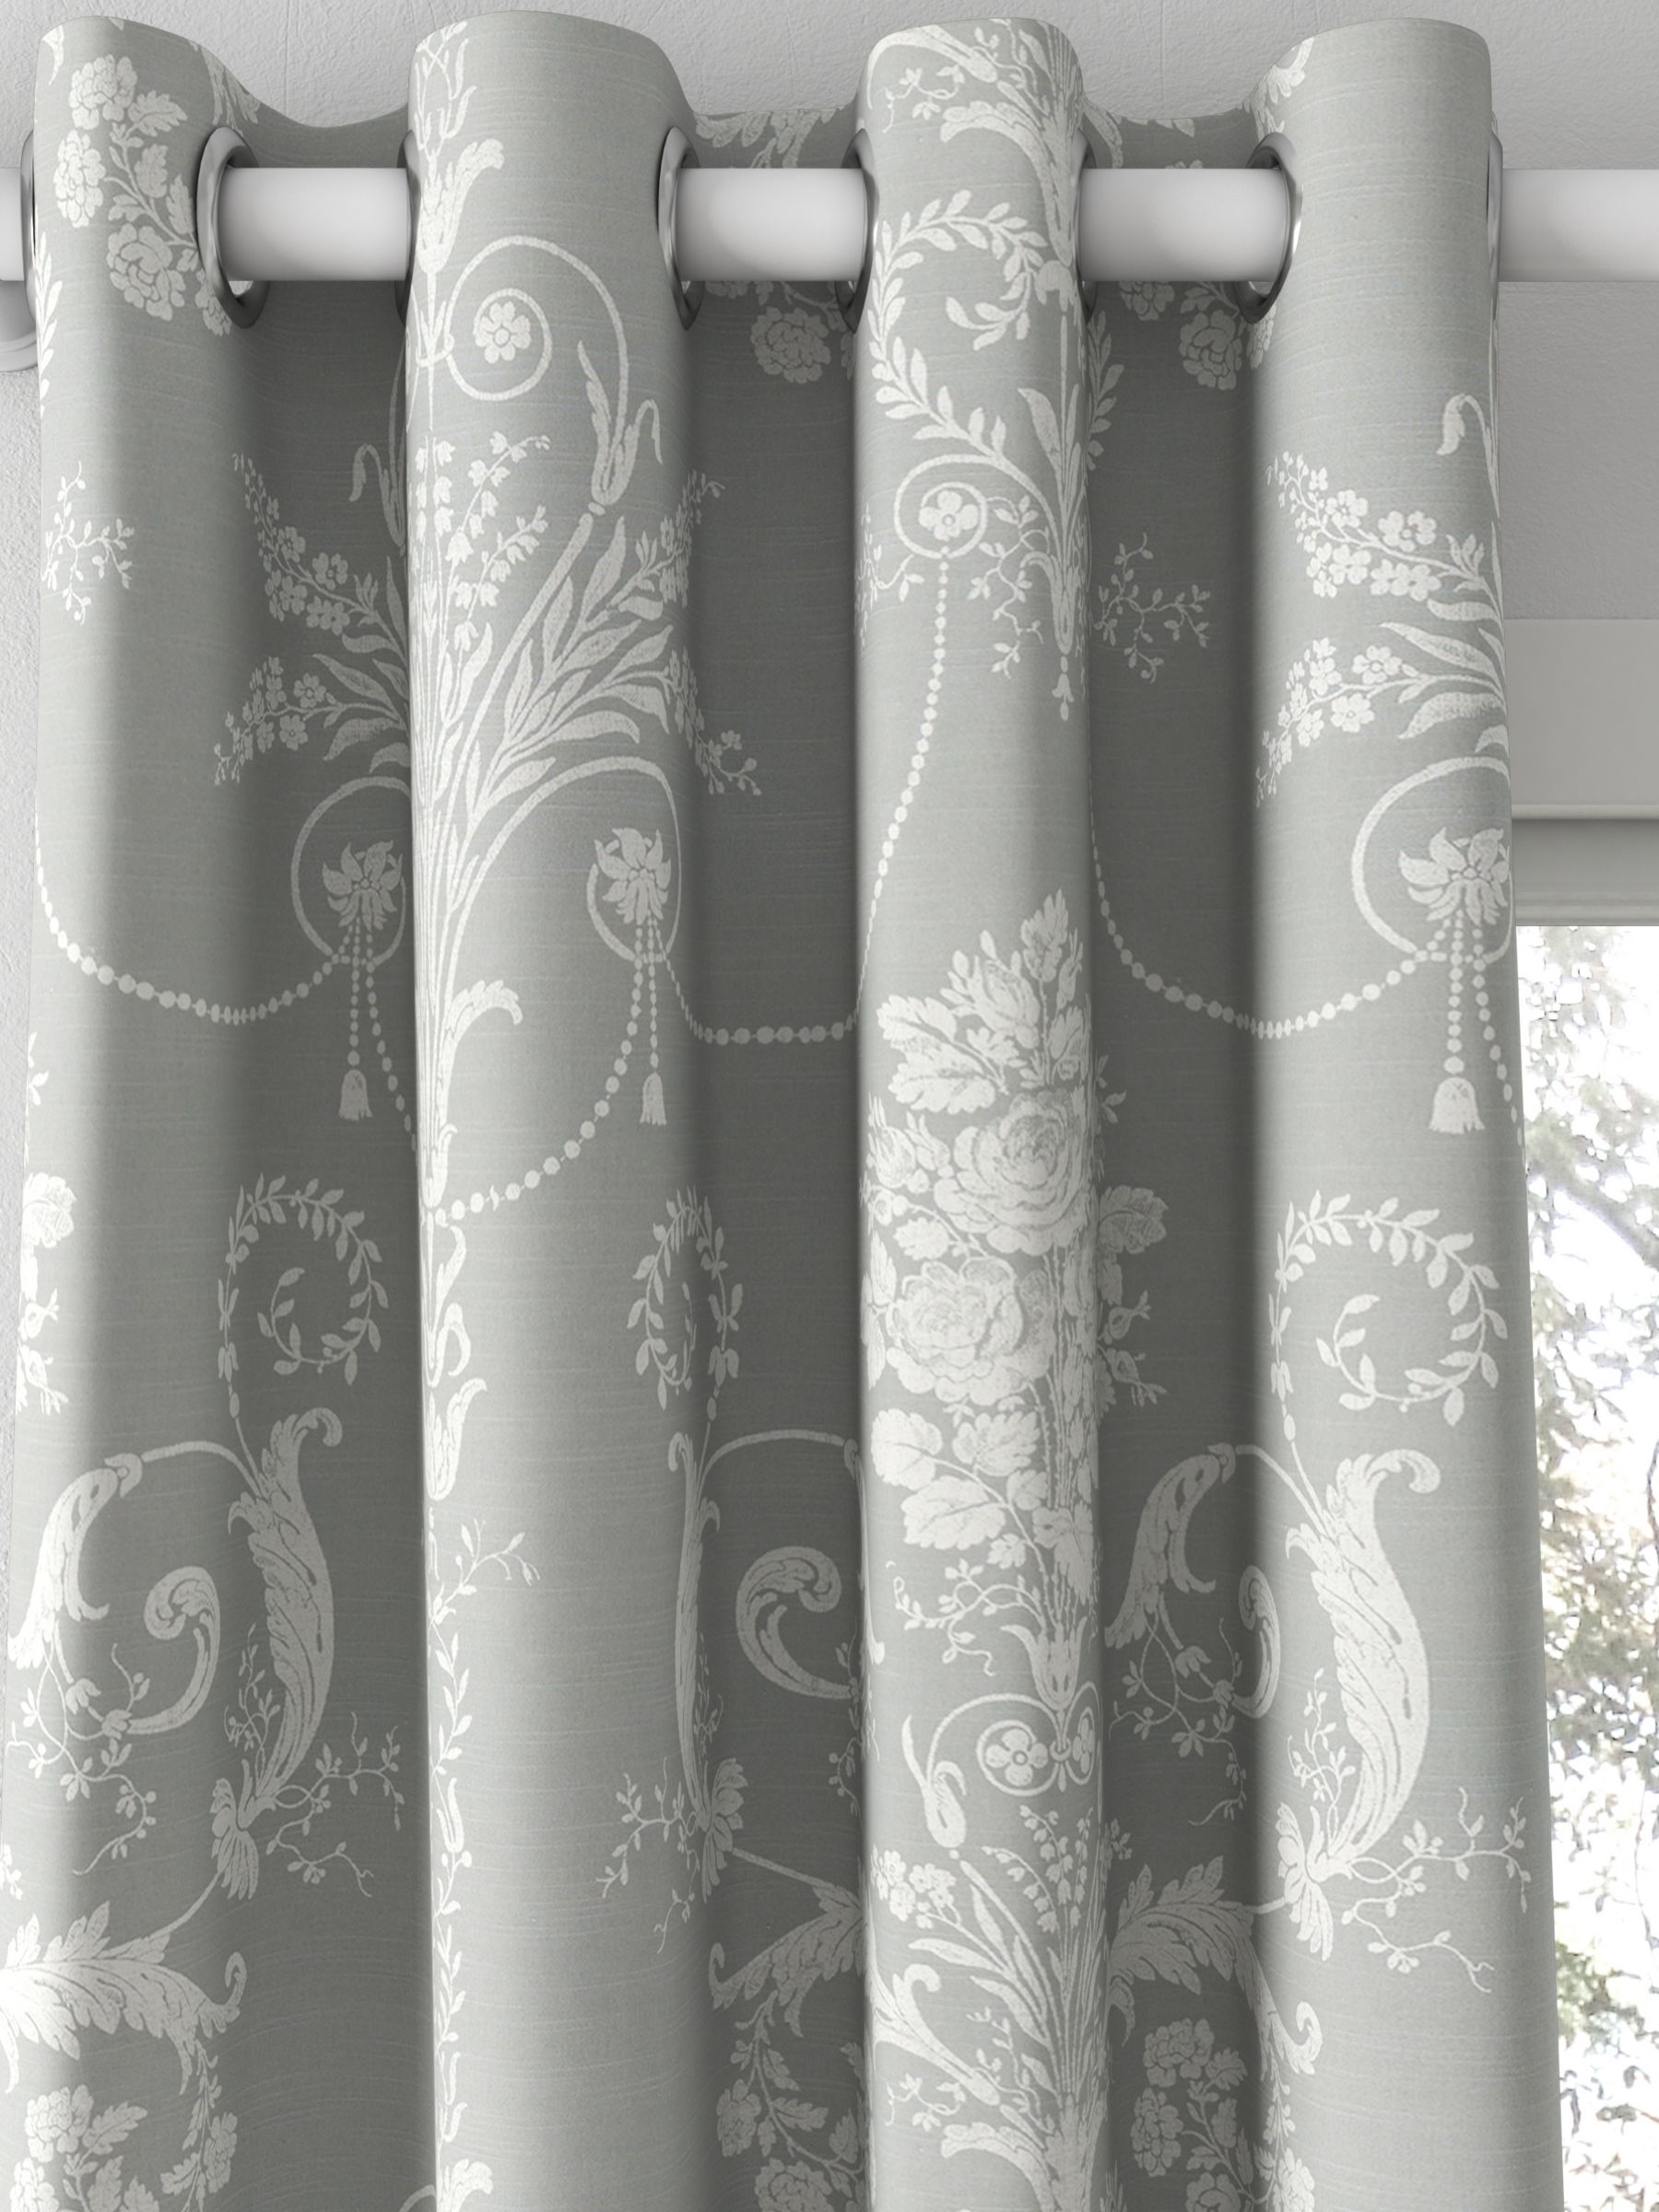 Laura Ashley Josette Made to Measure Curtains, Steel